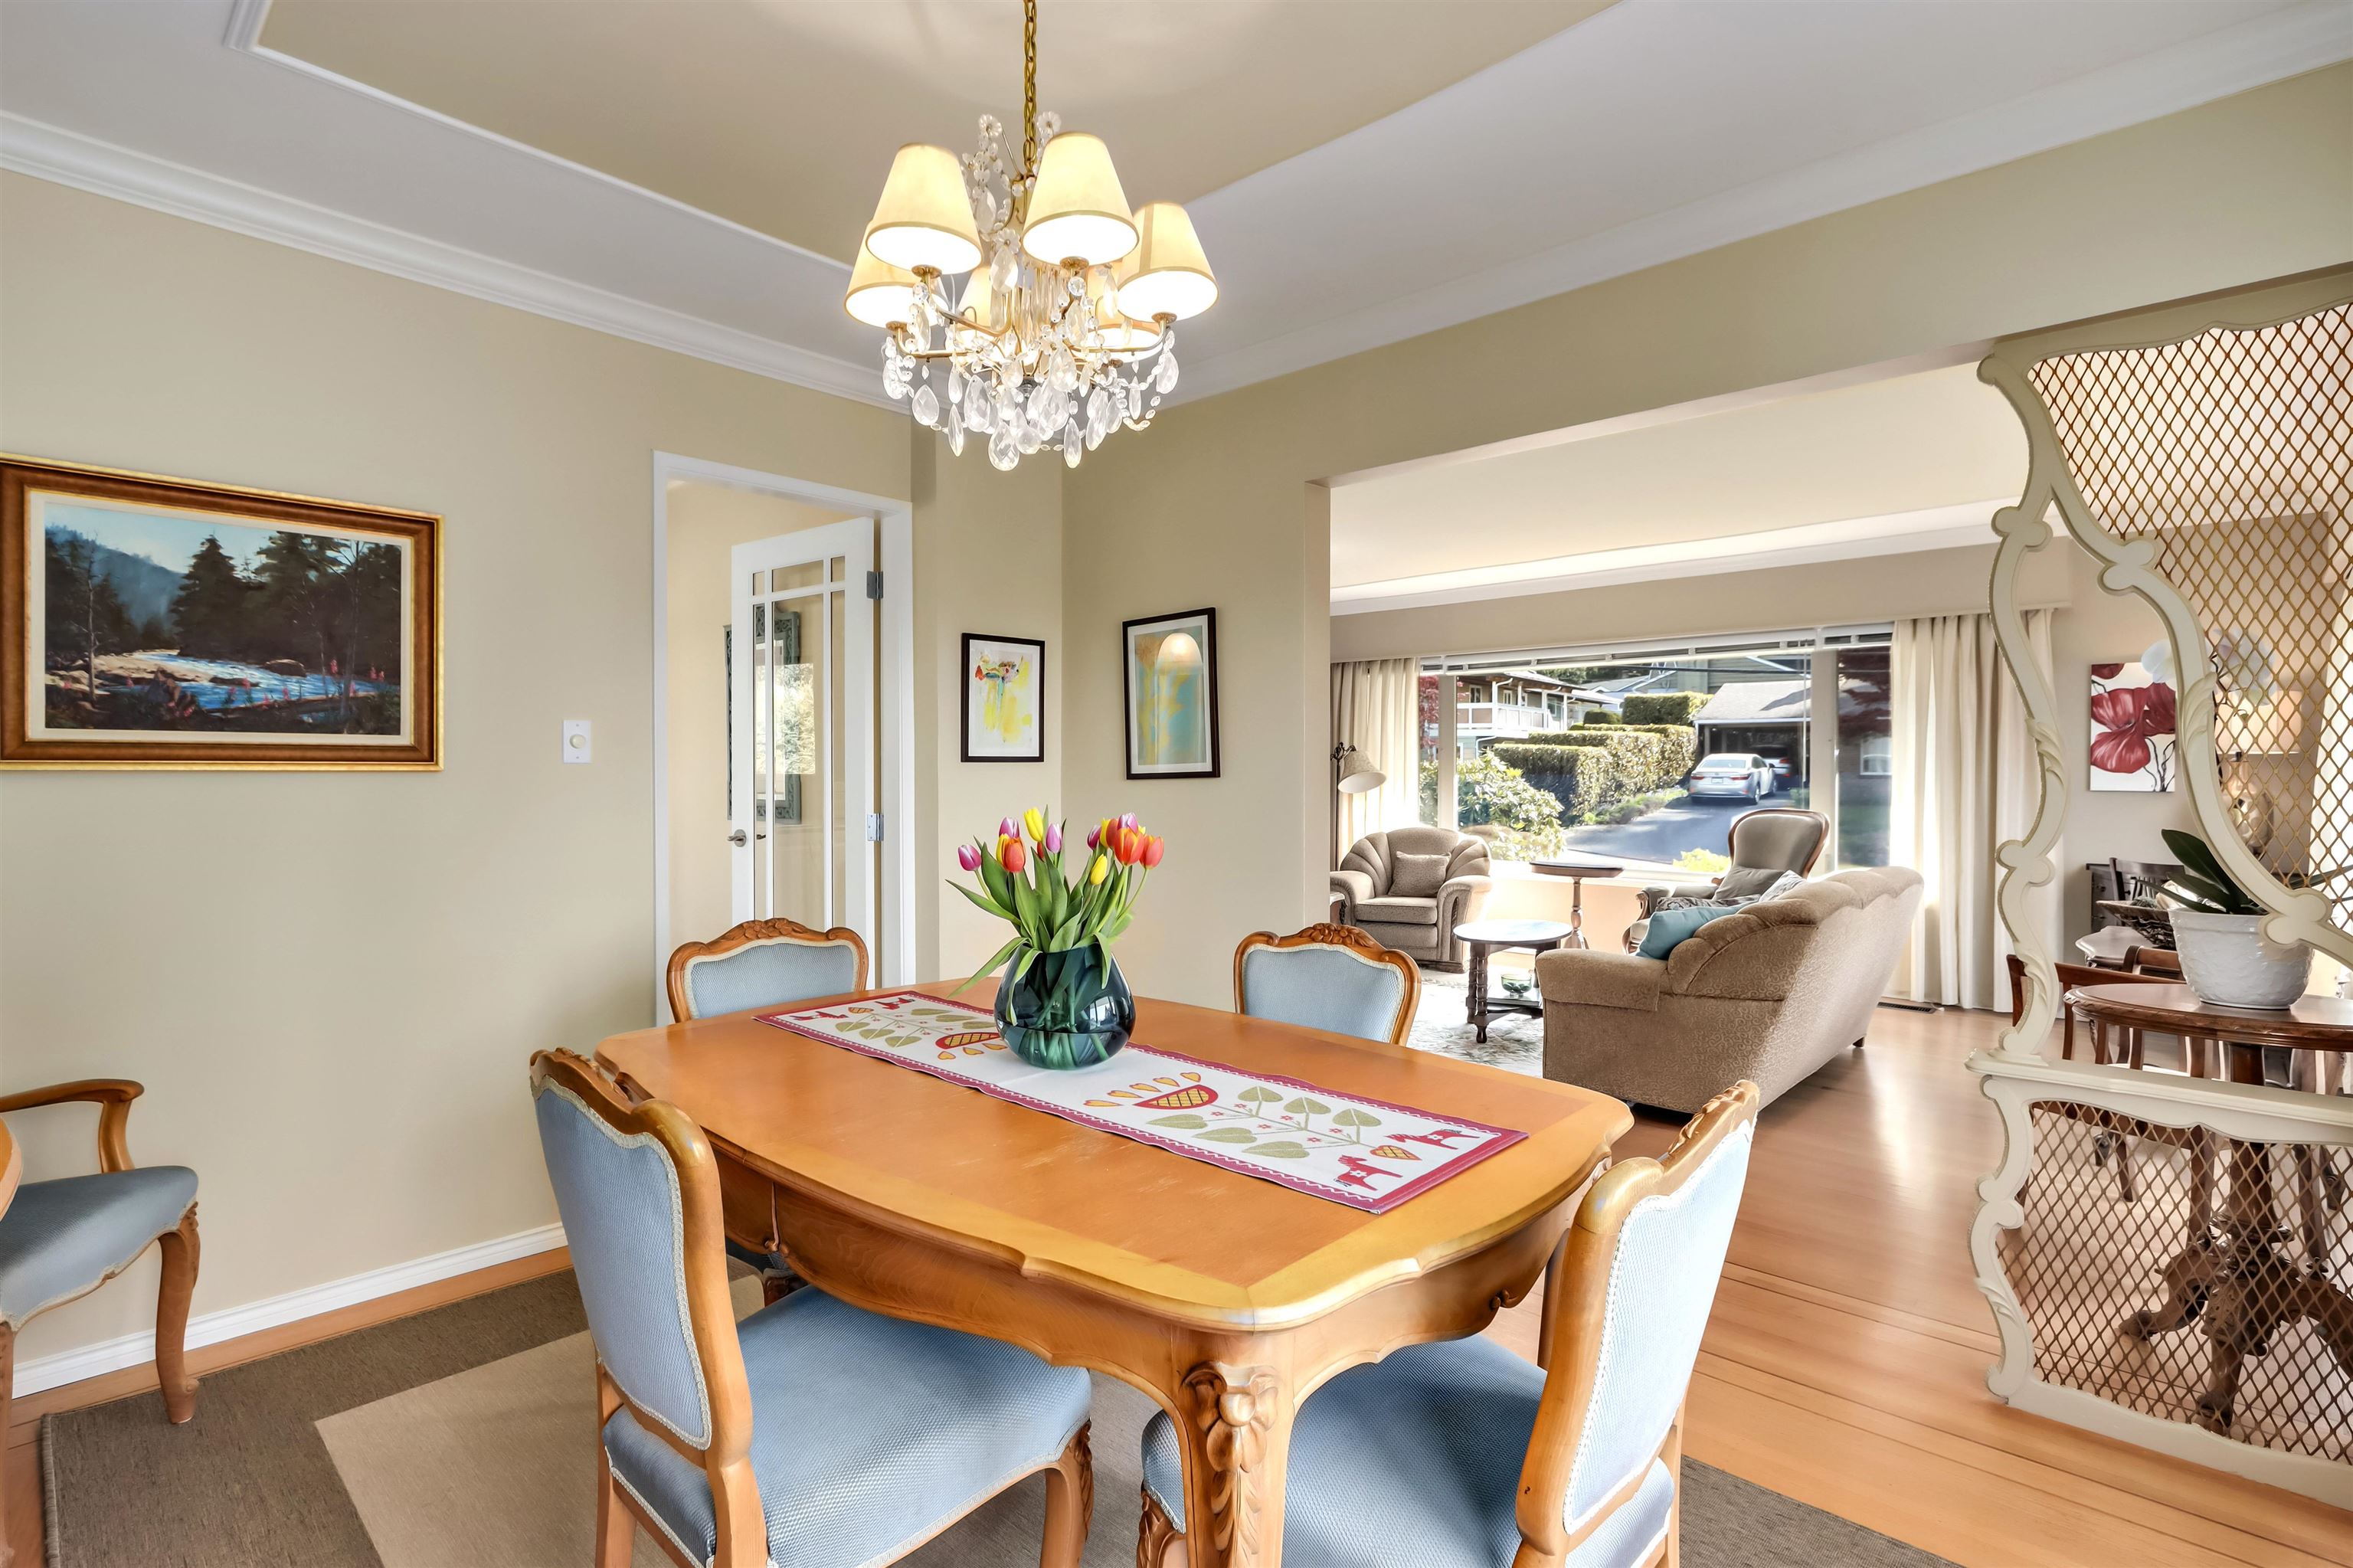 Listing image of 3825 GLENVIEW CRESCENT